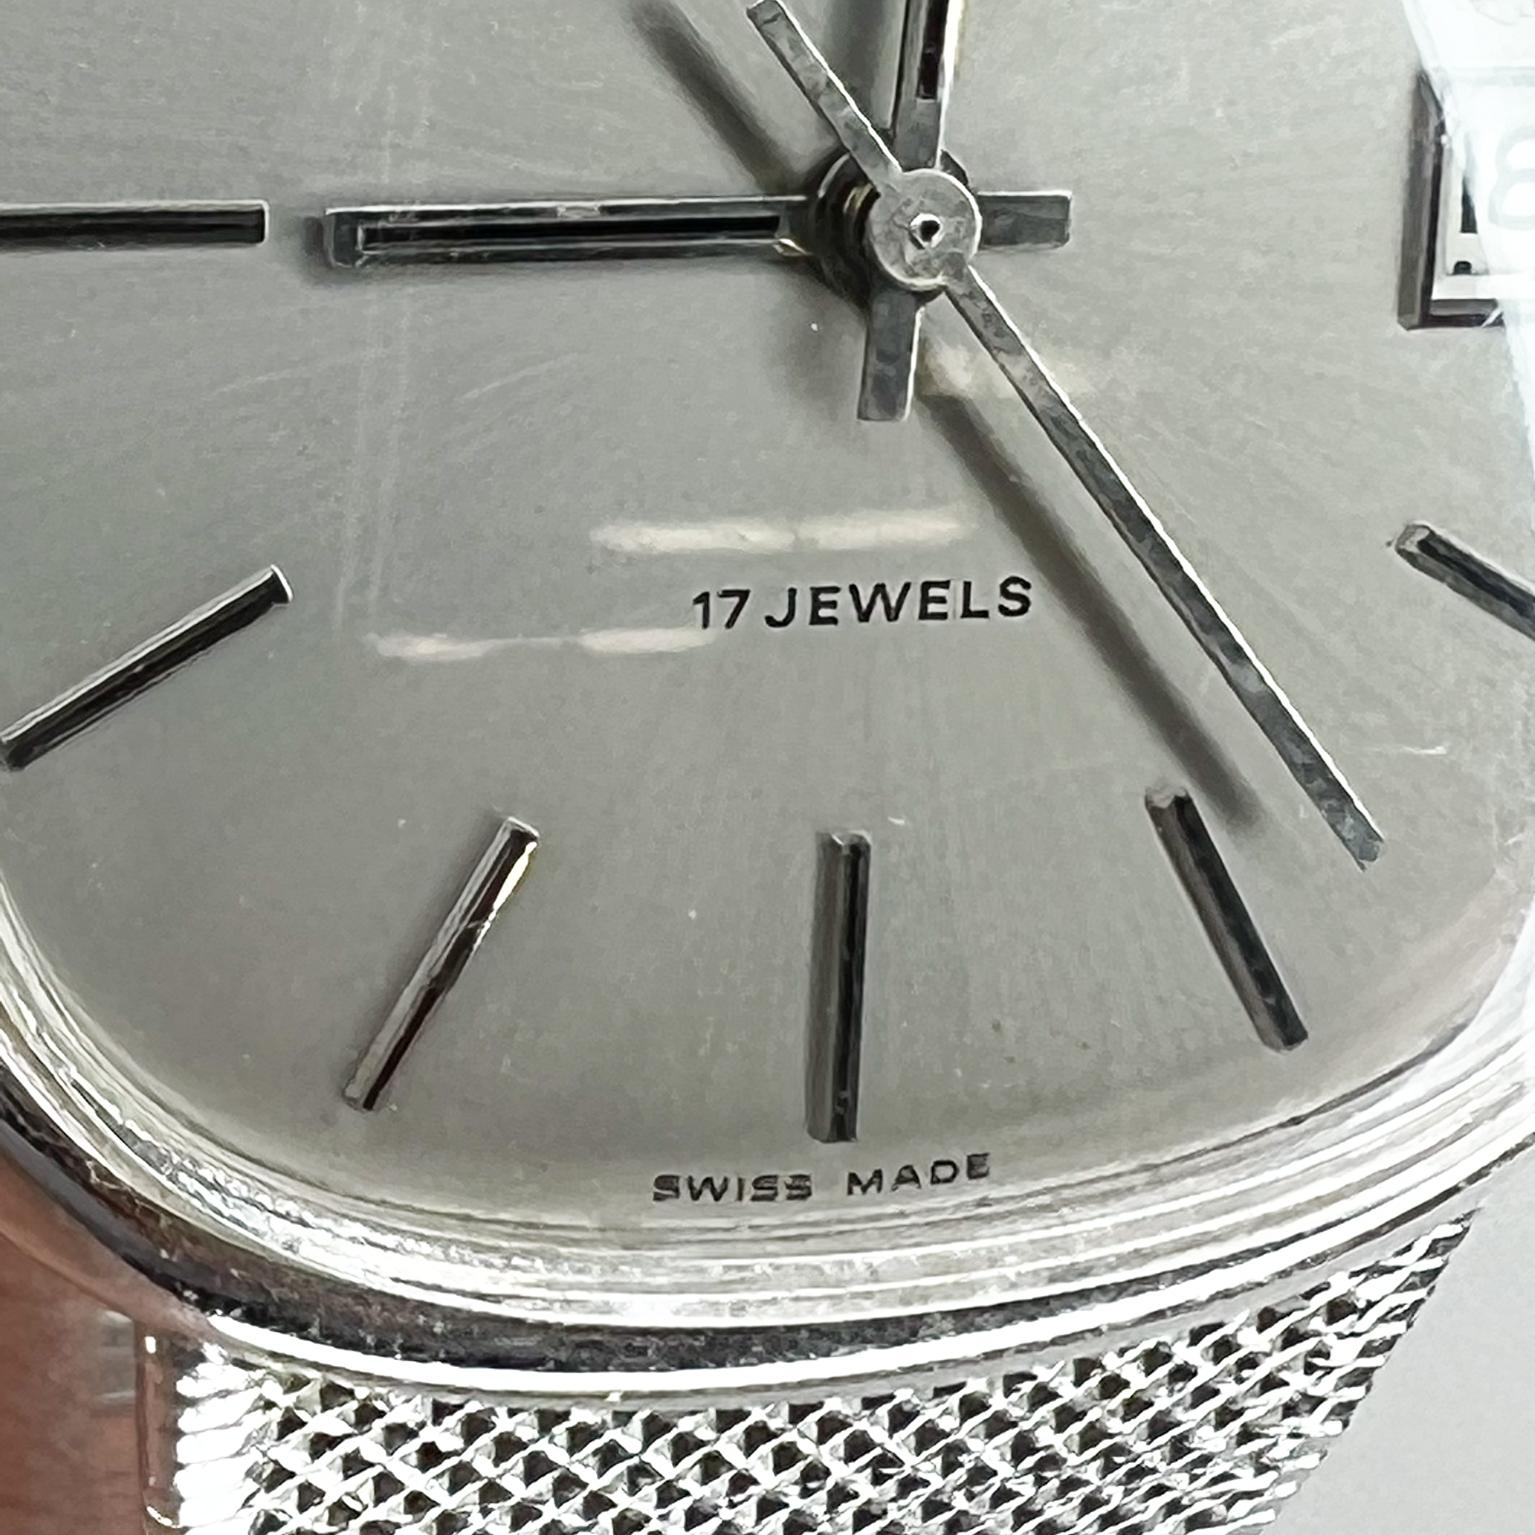 Vintage Tegrov Swiss Made Watch Mechanical 17 Jewels Stainless Steel For Sale 3